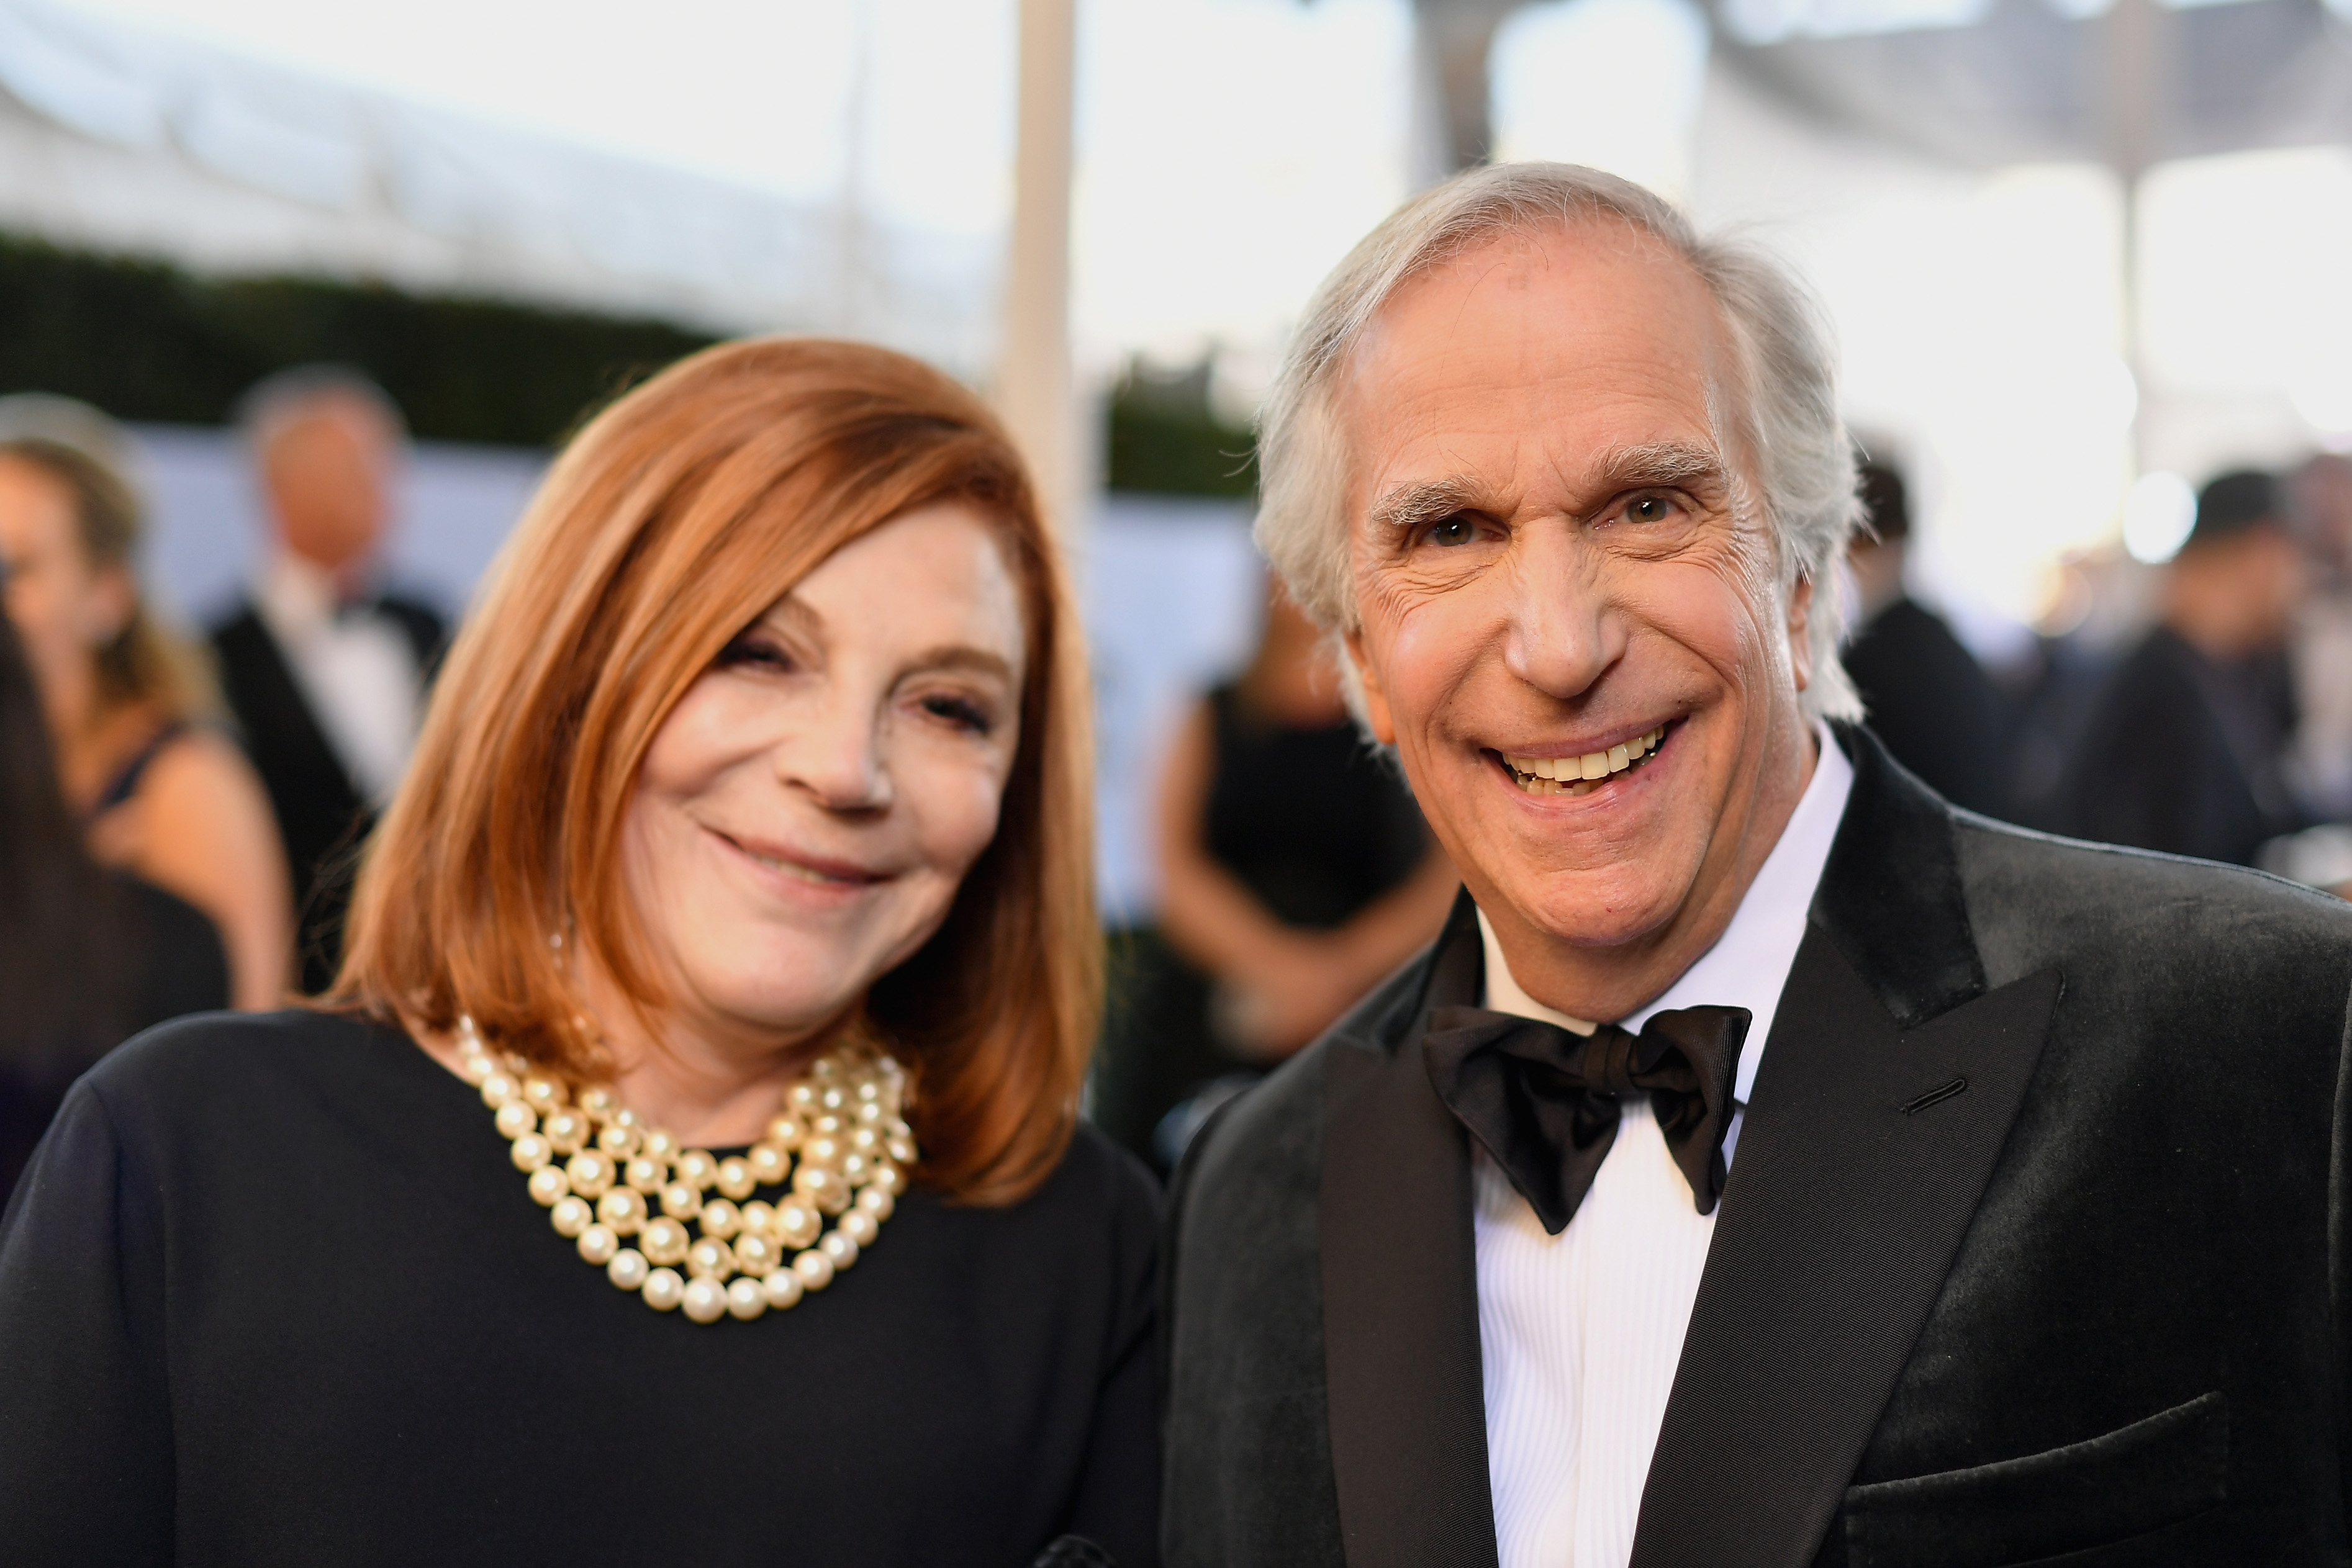 Stacey Weitzman and Henry Winkler at the 25th Annual Screen Actors Guild Awards in Los Angeles, California on January 27, 2019 | Source: Getty Images